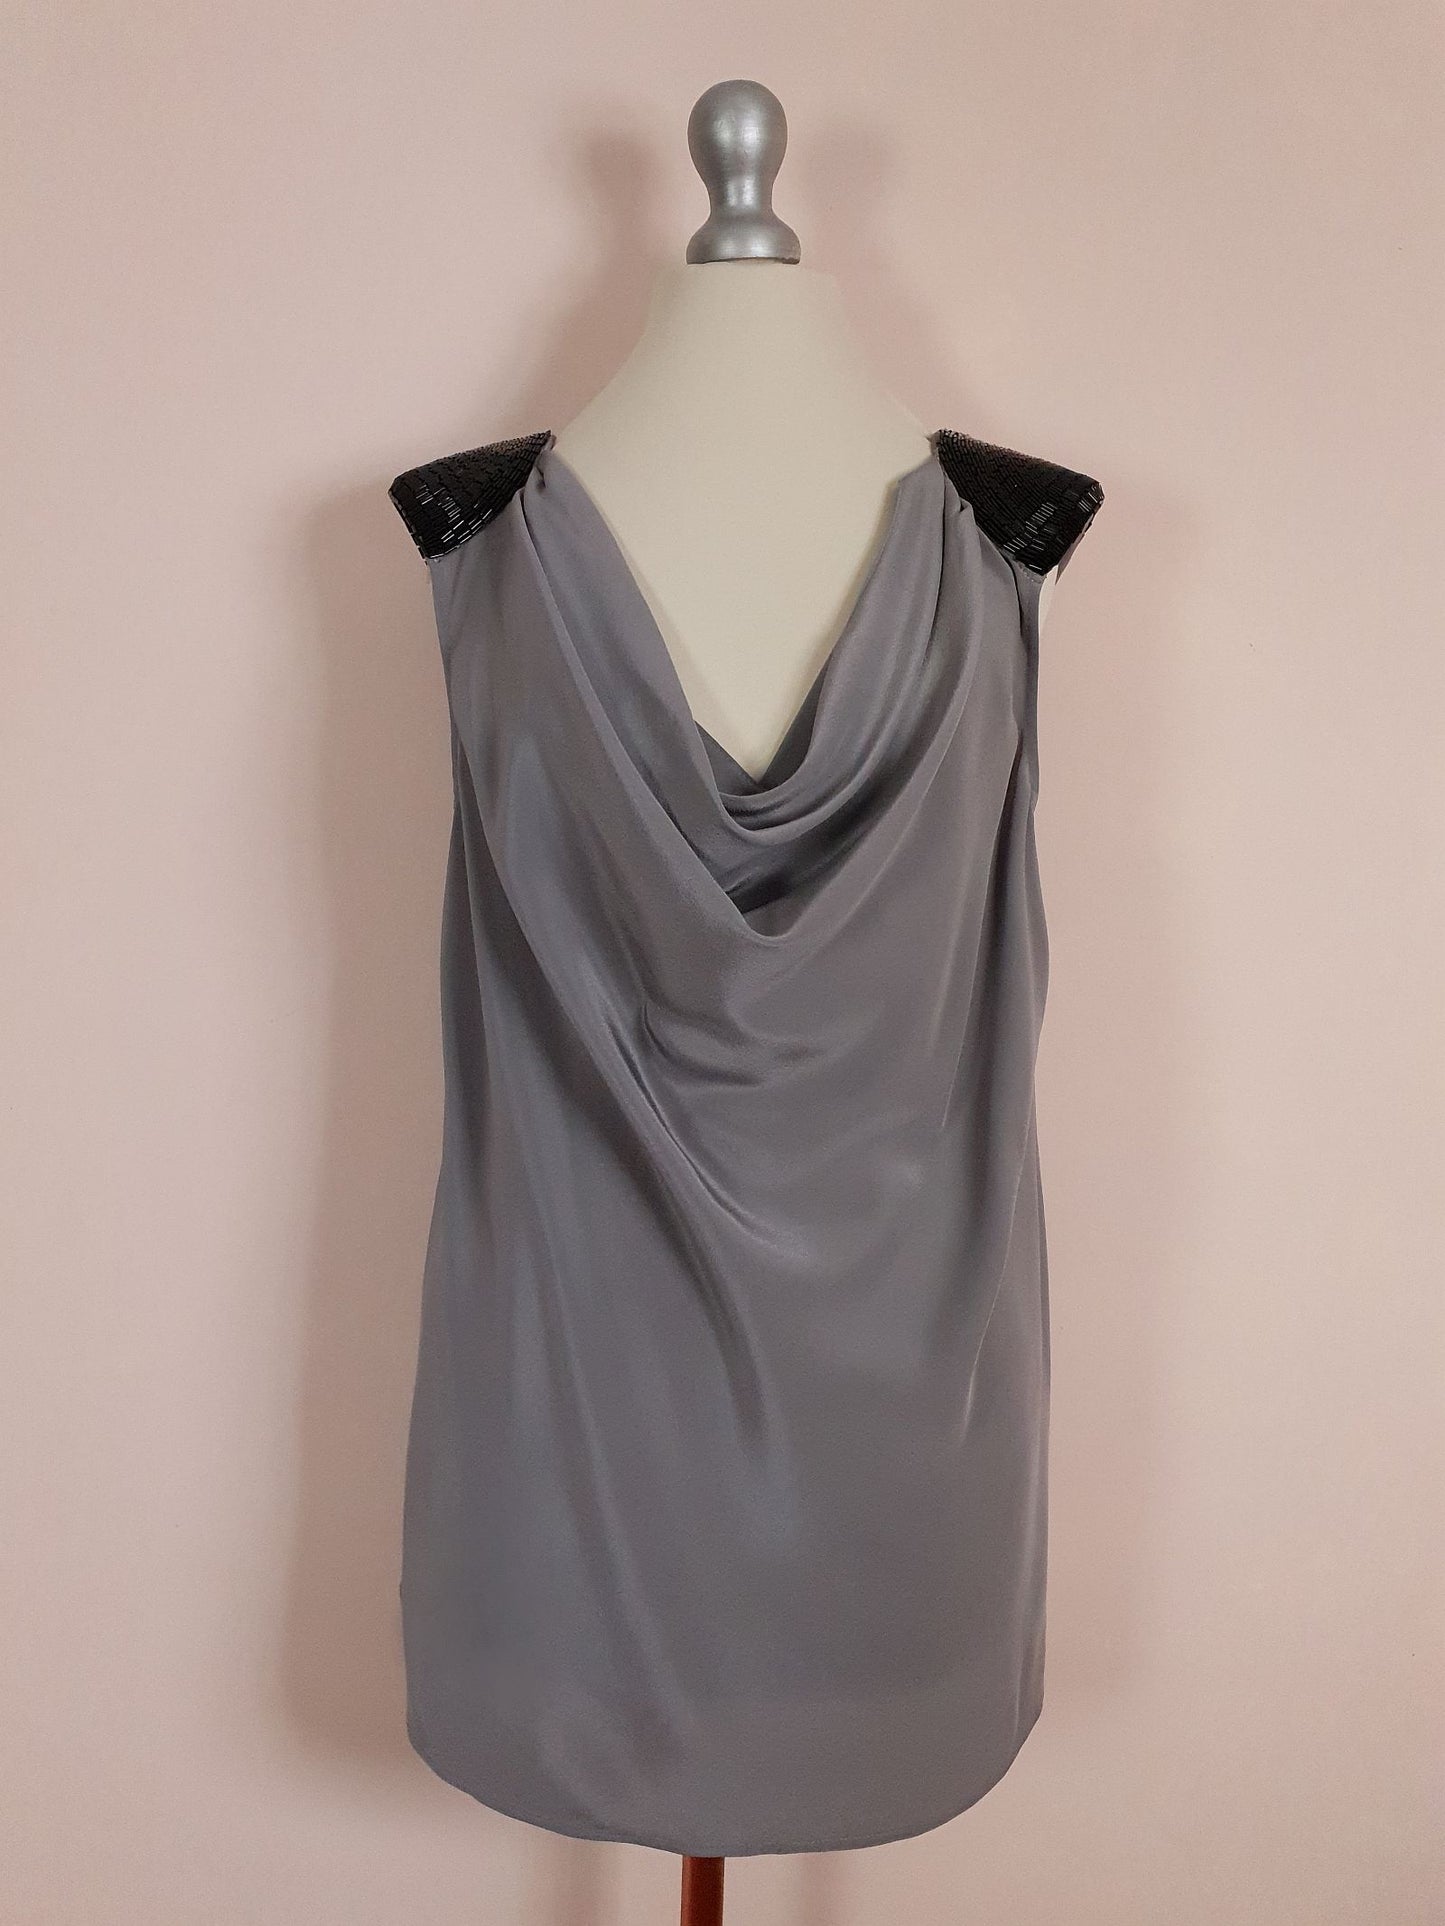 Pre-owned Kenneth Cole Grey Silk Top Beaded Evening Size 14 Draped